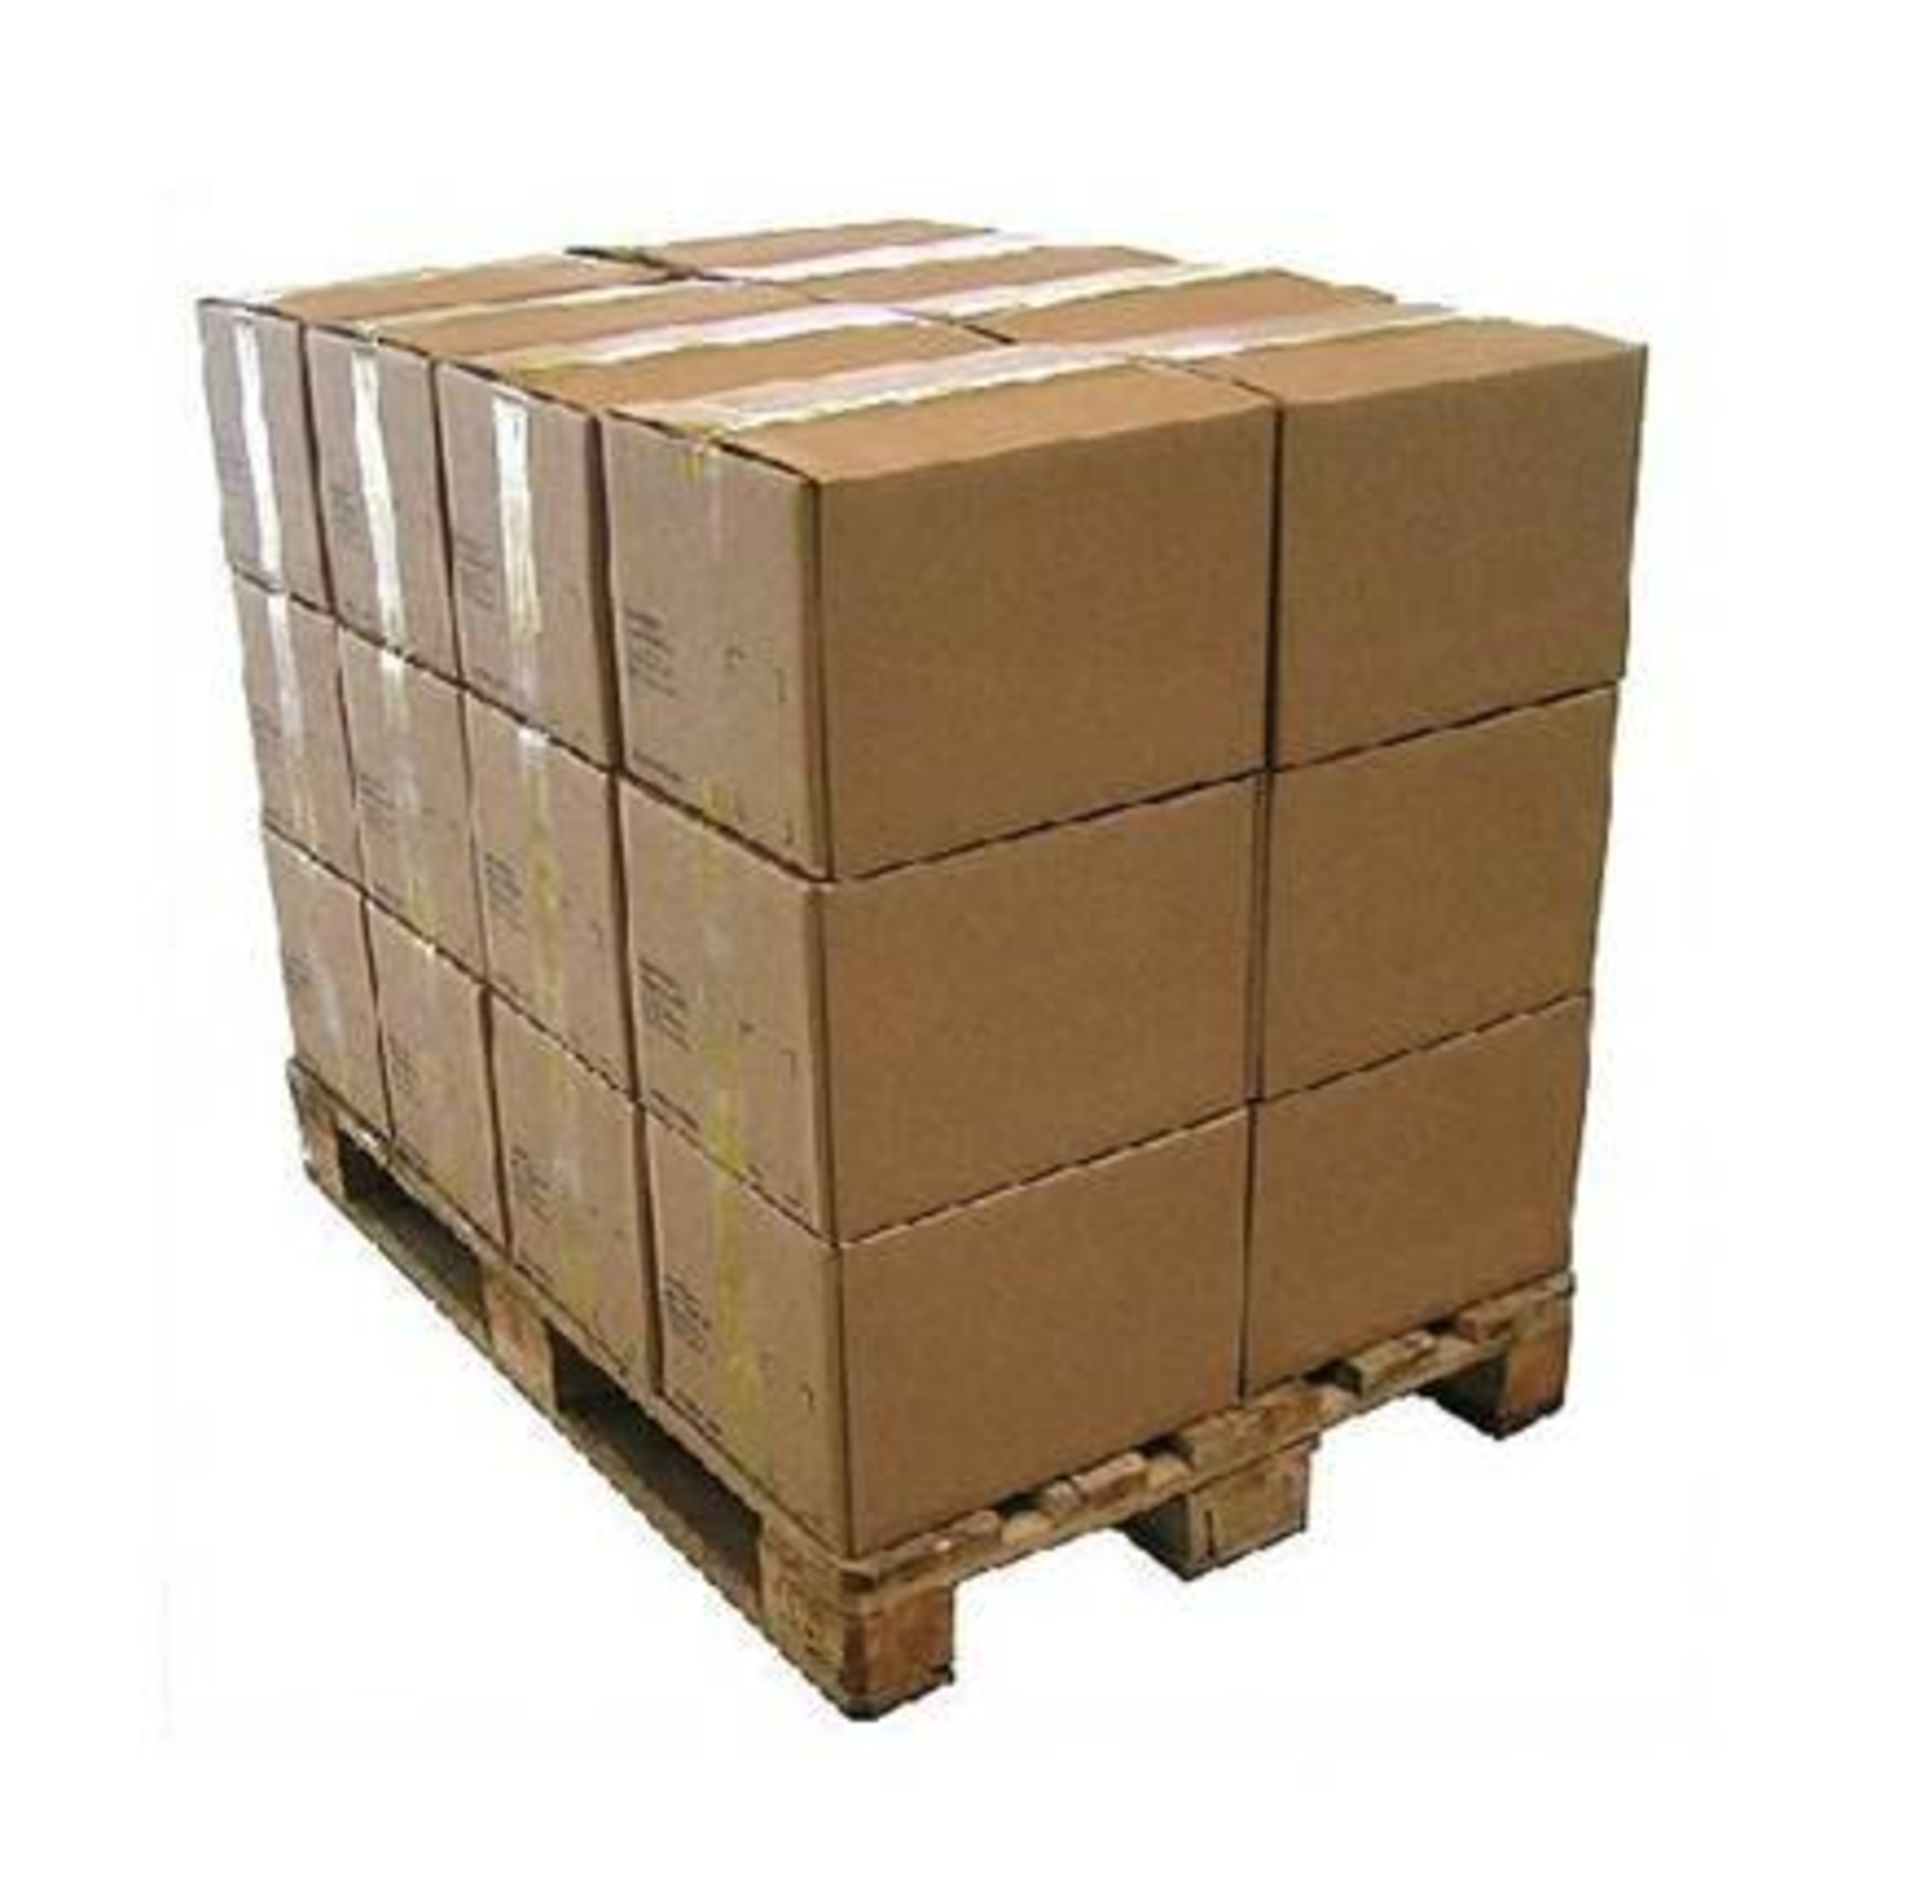 10,000 x Wholesale Make up Stock - Mixed Items -Factory Packed Random selection of items to